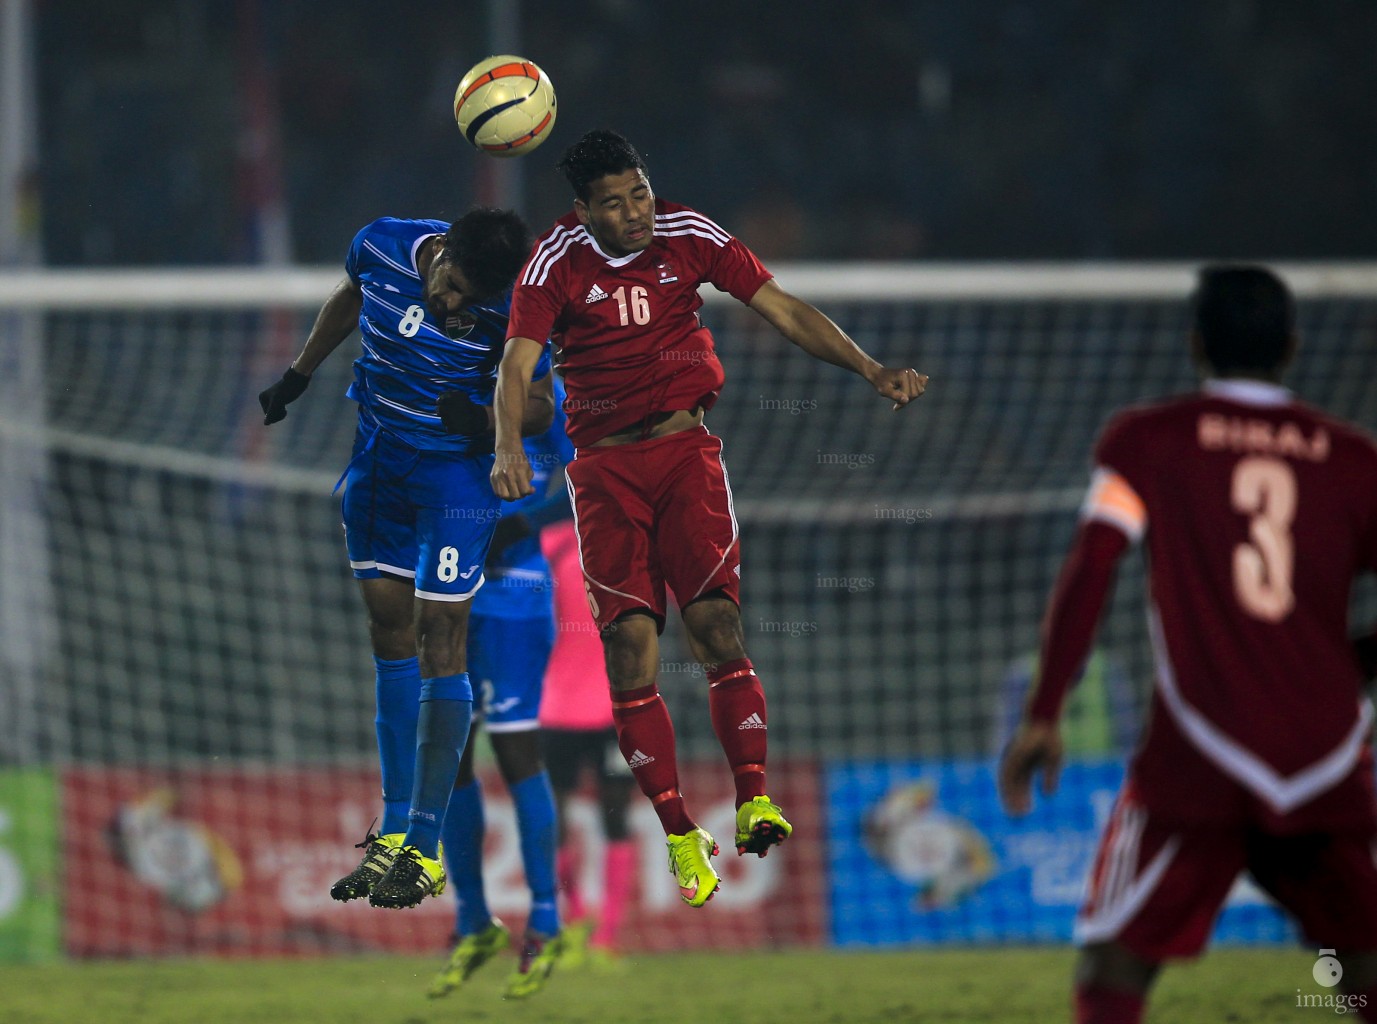 Maldives U23 national football team played against Nepal U23 team in the South Asian Games Football event in Guwahati, India, Friday, February 13, 2016. (Images.mv Photo: Mohamed Ahsan)